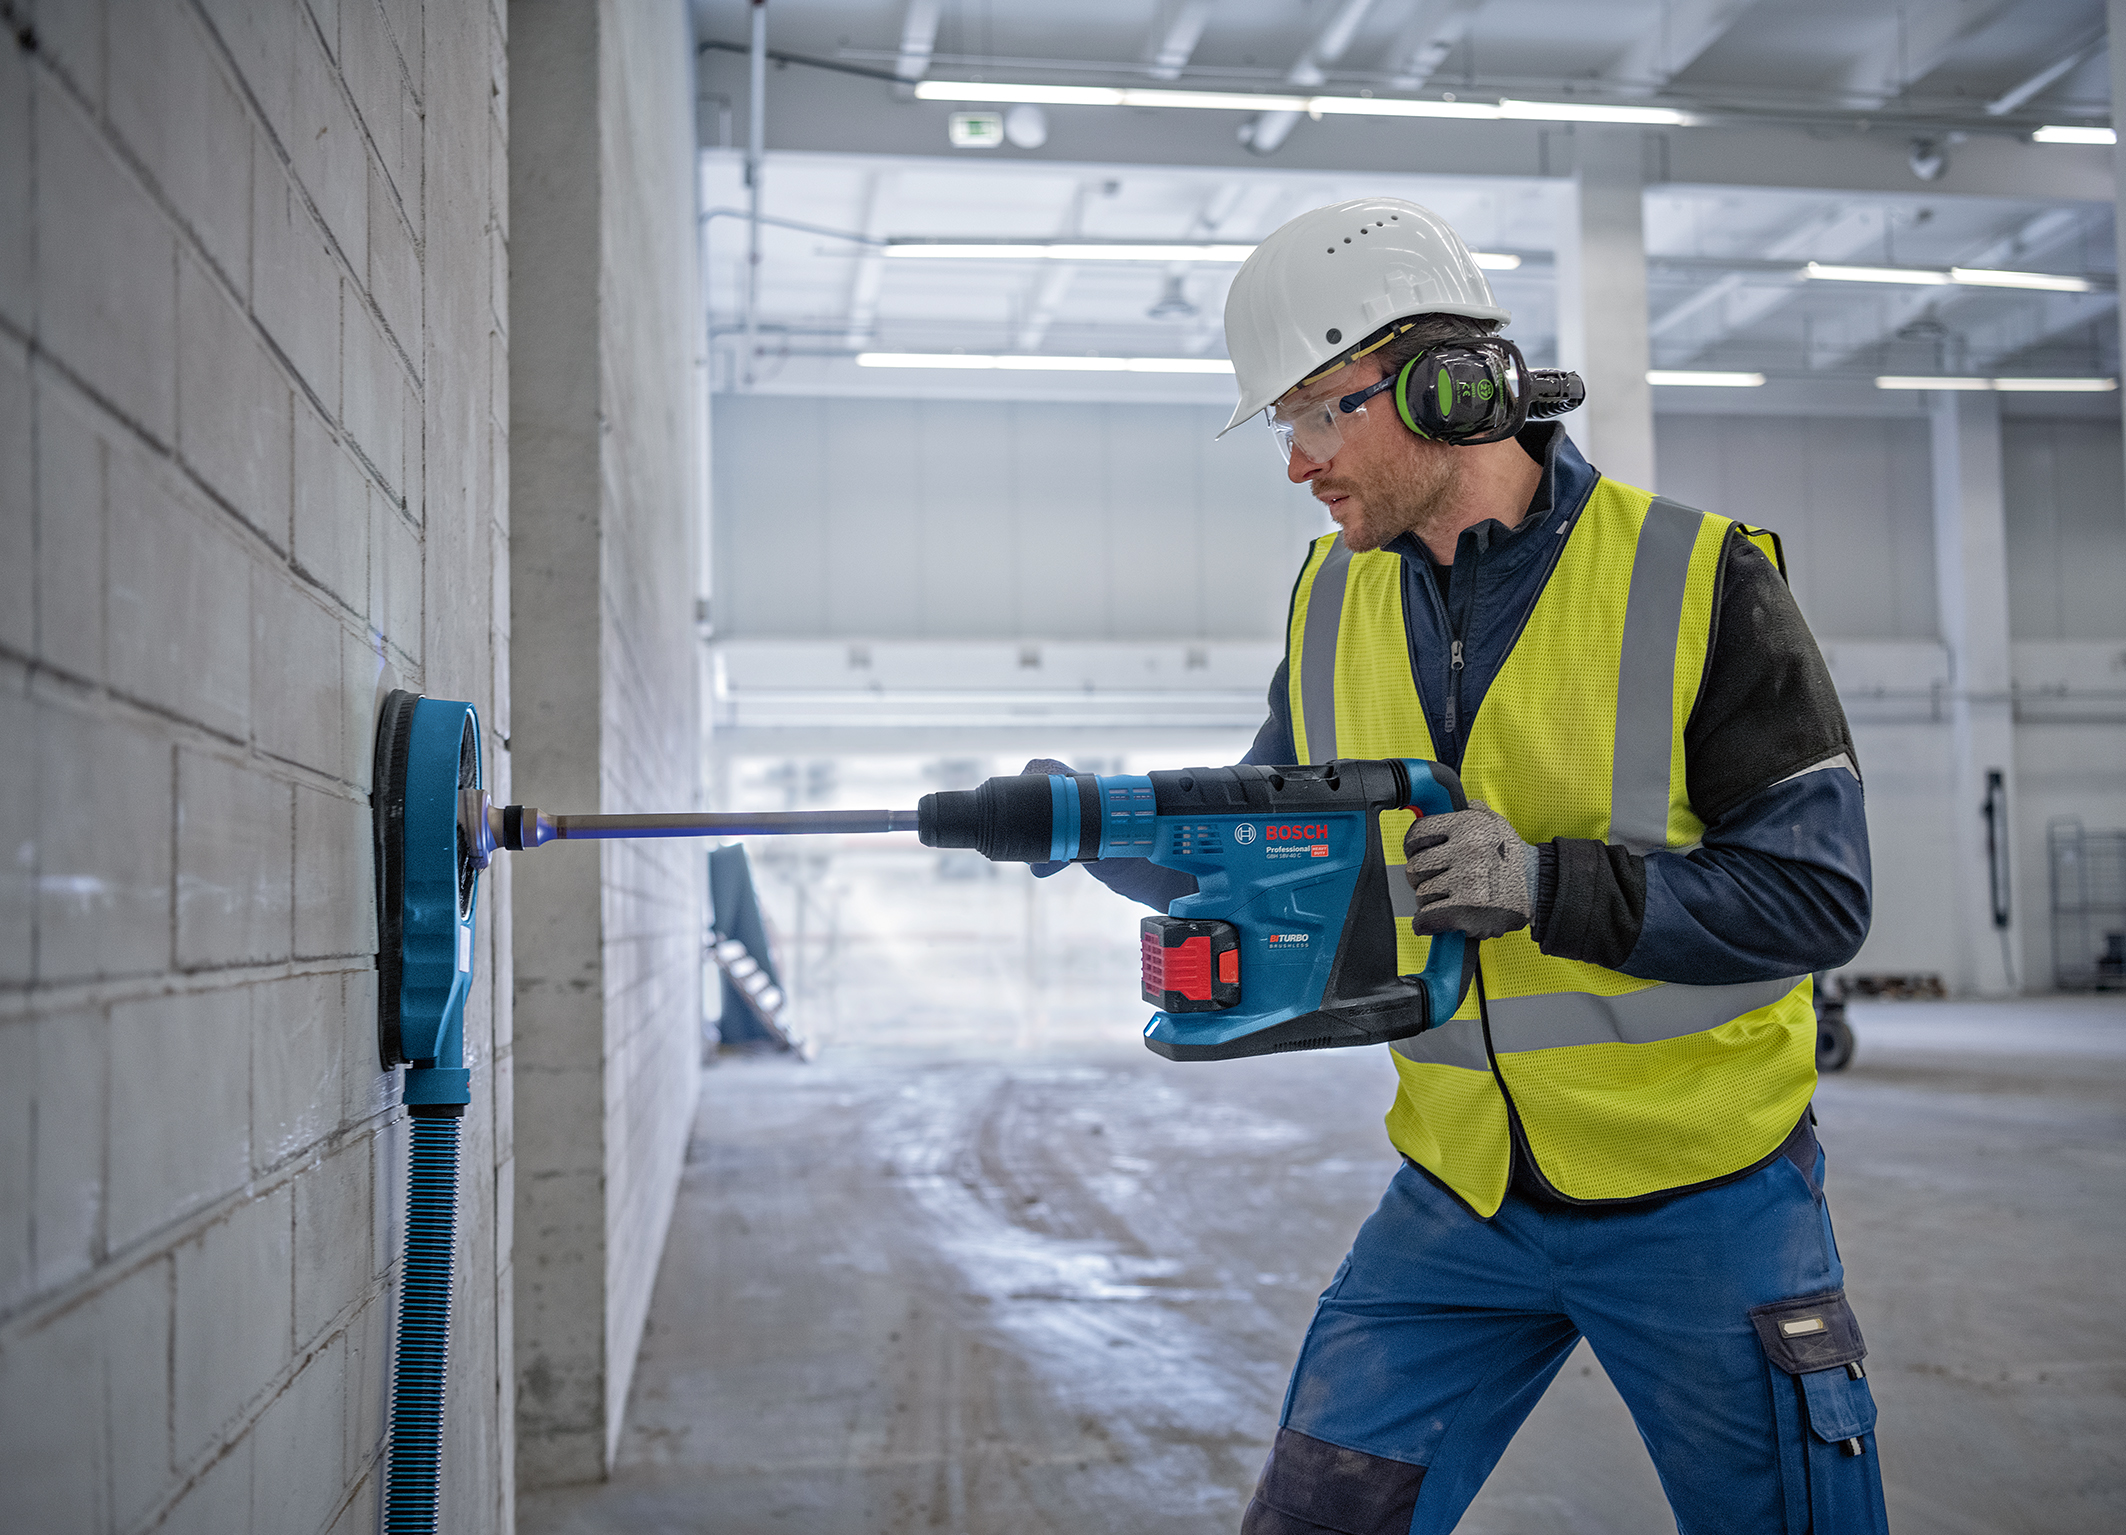 Powerful tool with high user protection: Biturbo cordless rotary hammer GBH 18V-40 C Professional from Bosch